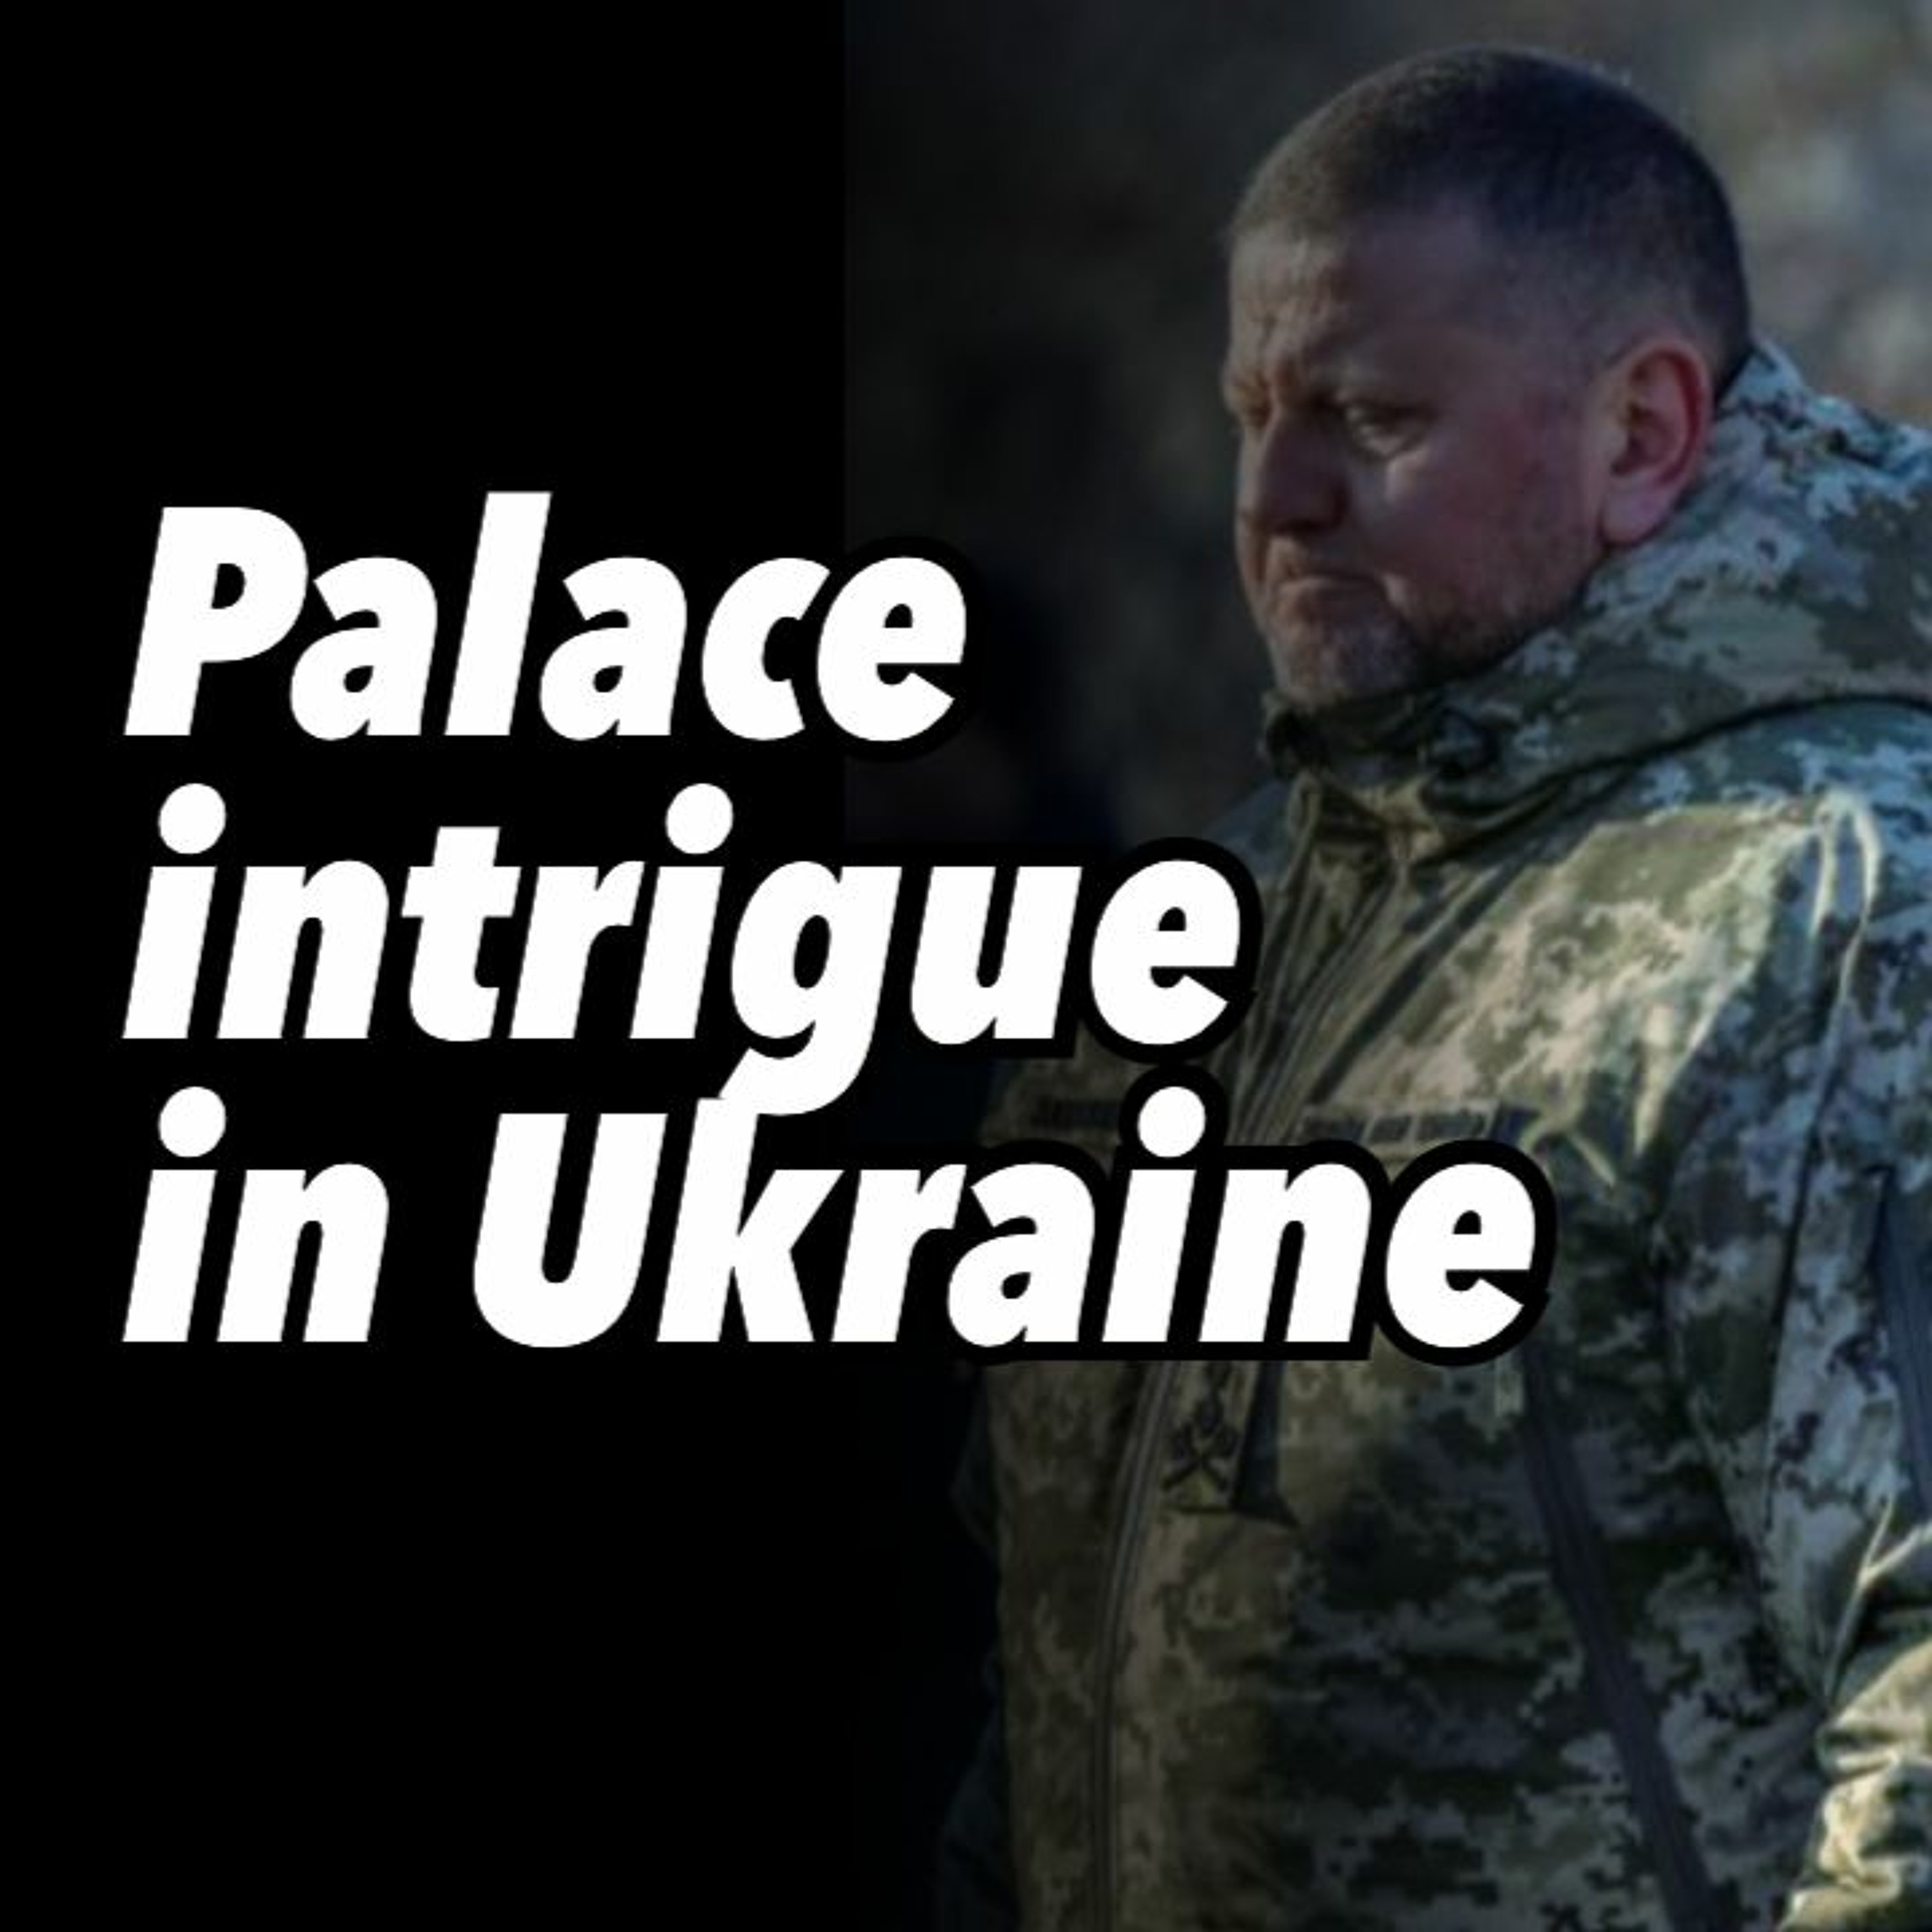 Palace intrigue in Ukraine